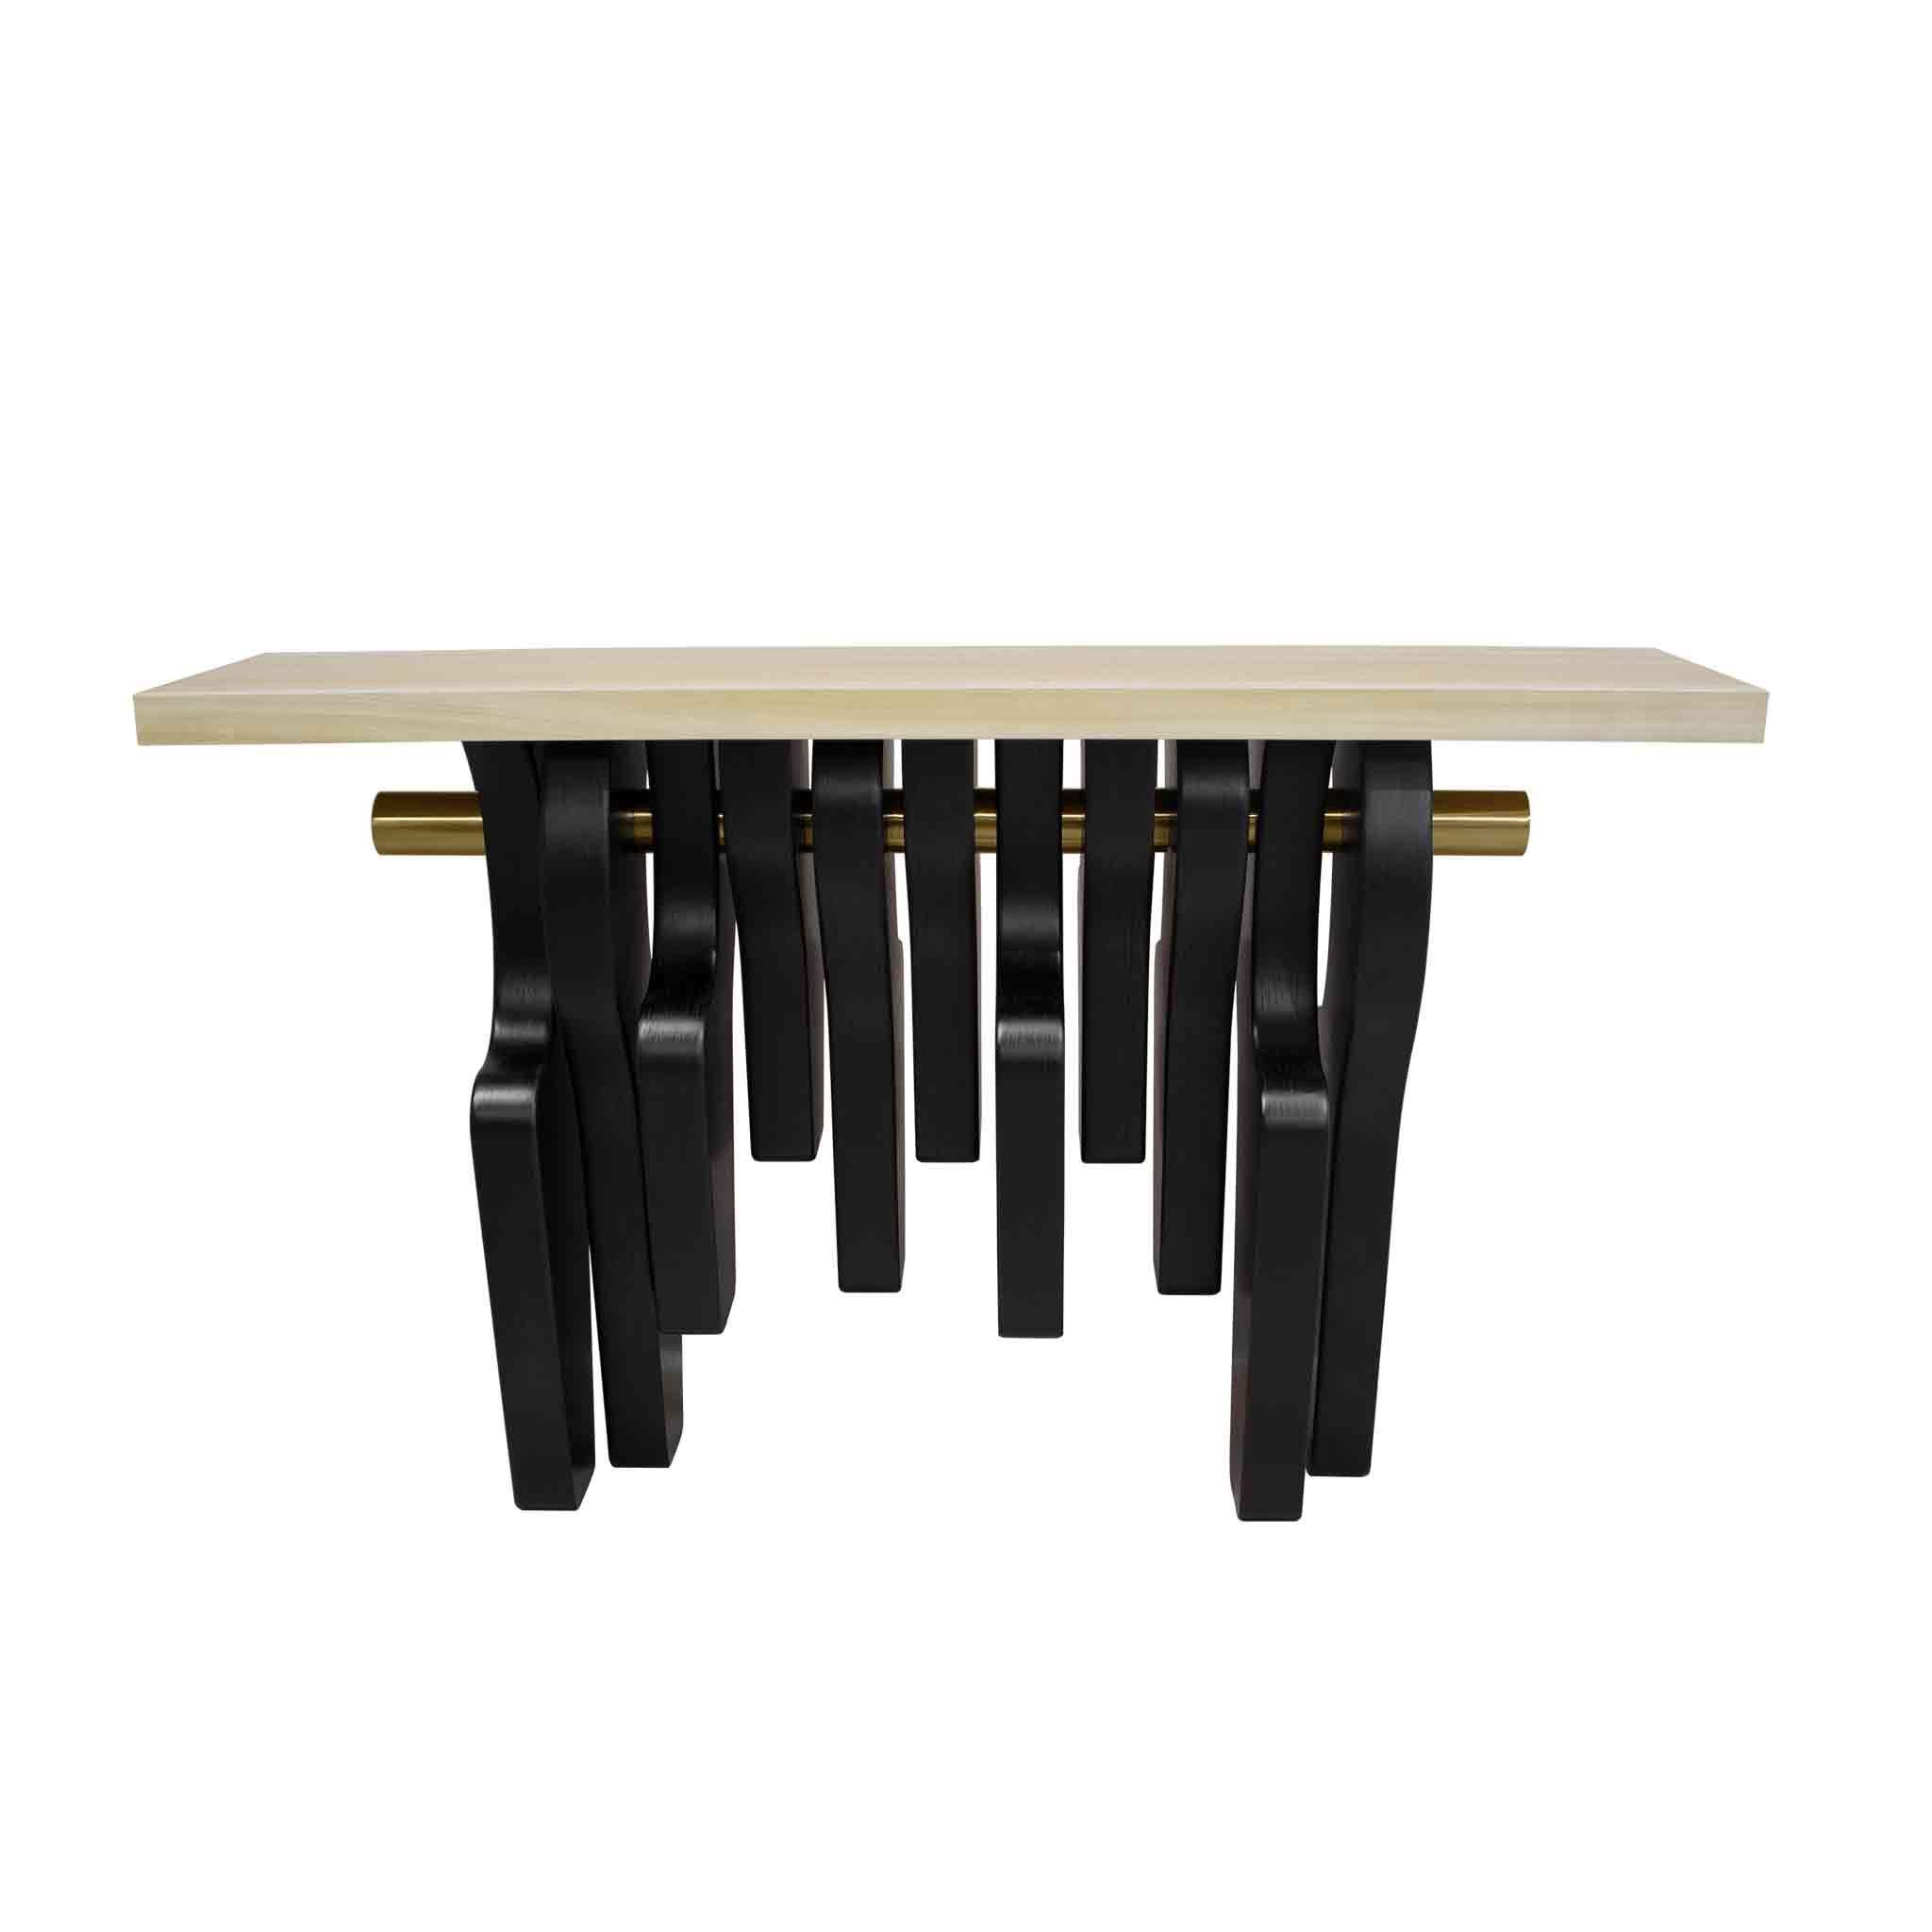 Limited Edition: Cadiz Console Table is a reflection of a modern design. A handmade wood console table is the perfect piece of furniture for a modern living room design or a luxury entryway decor.

Materials: Top in Gloss White Bird Eye Veneer; Legs